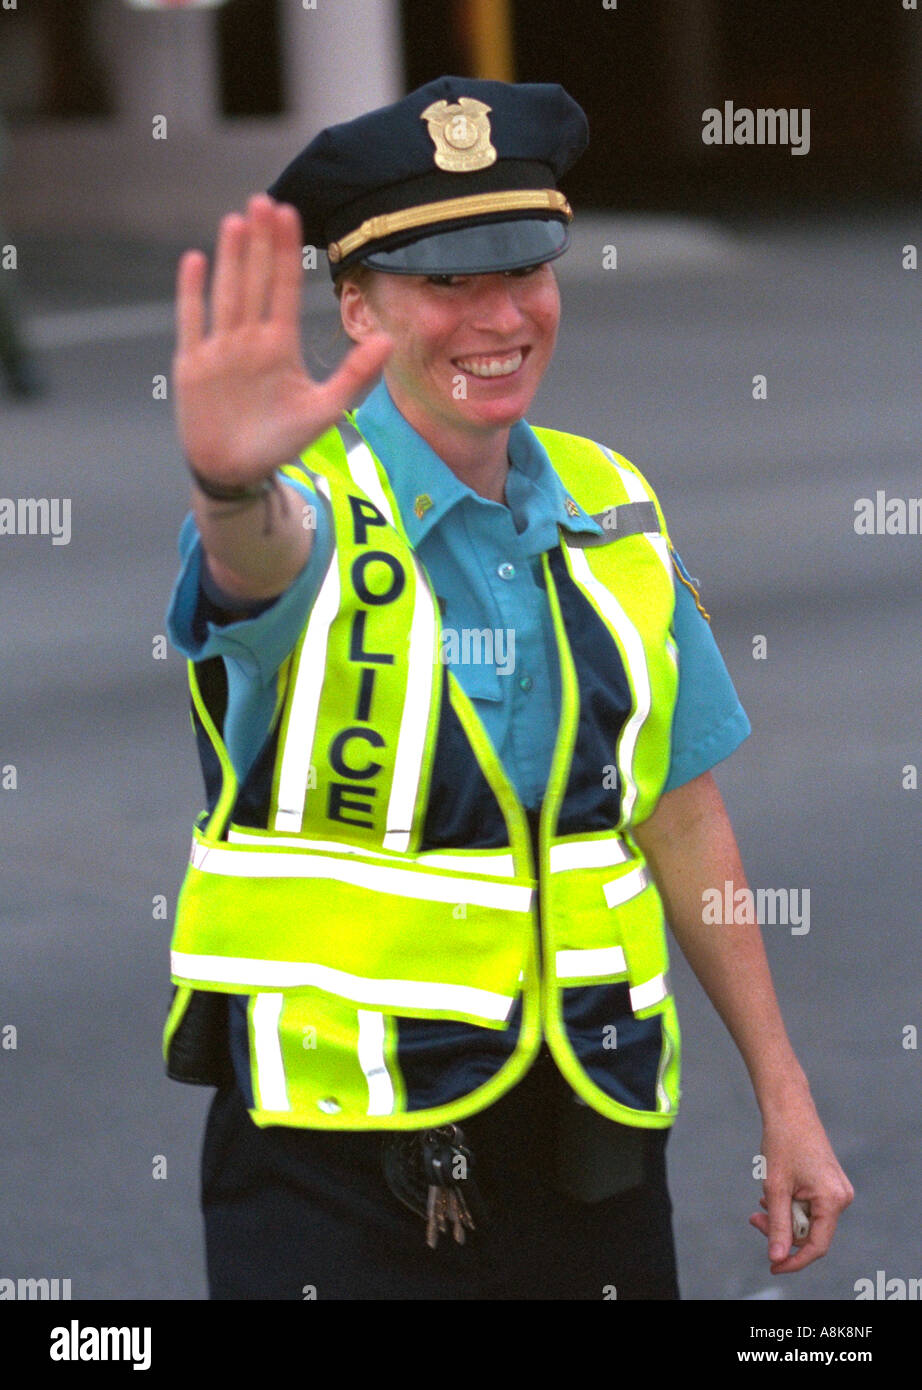 SEXUALLY EXCITED POLICEWOMAN